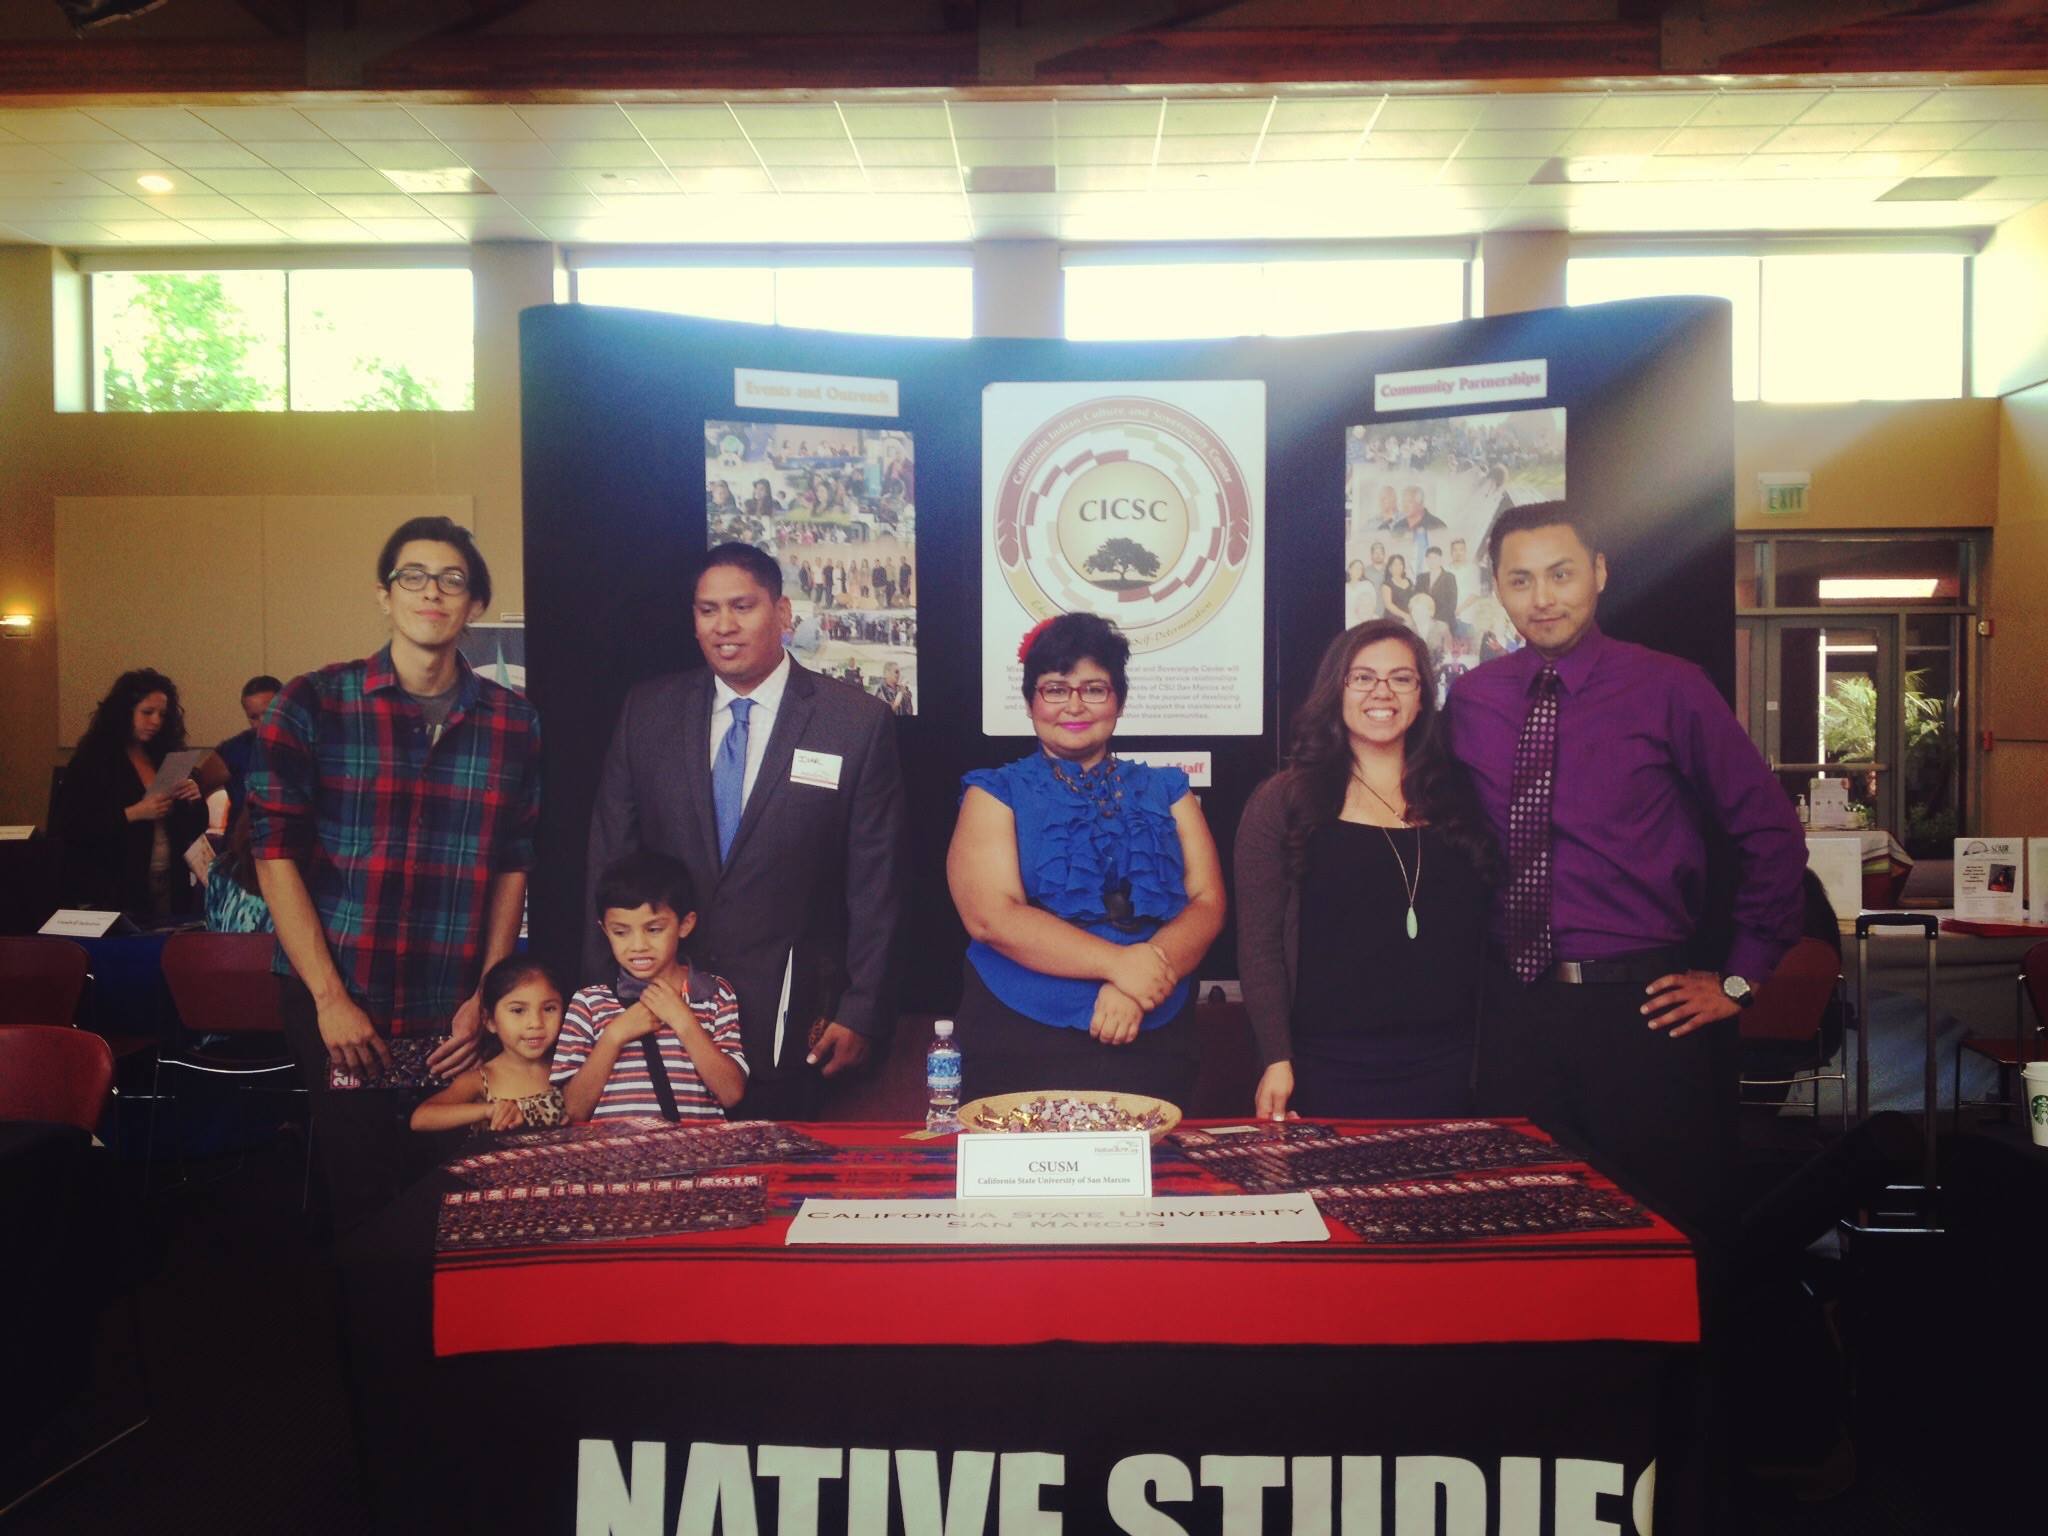 A group of people standing behind a table with various brochures and items on it, and a tablecloth that says "Native Studies" on the front; the people are also standing in front of a large tri-fold poster with a large CICSC logo on it as well as collages of pictures